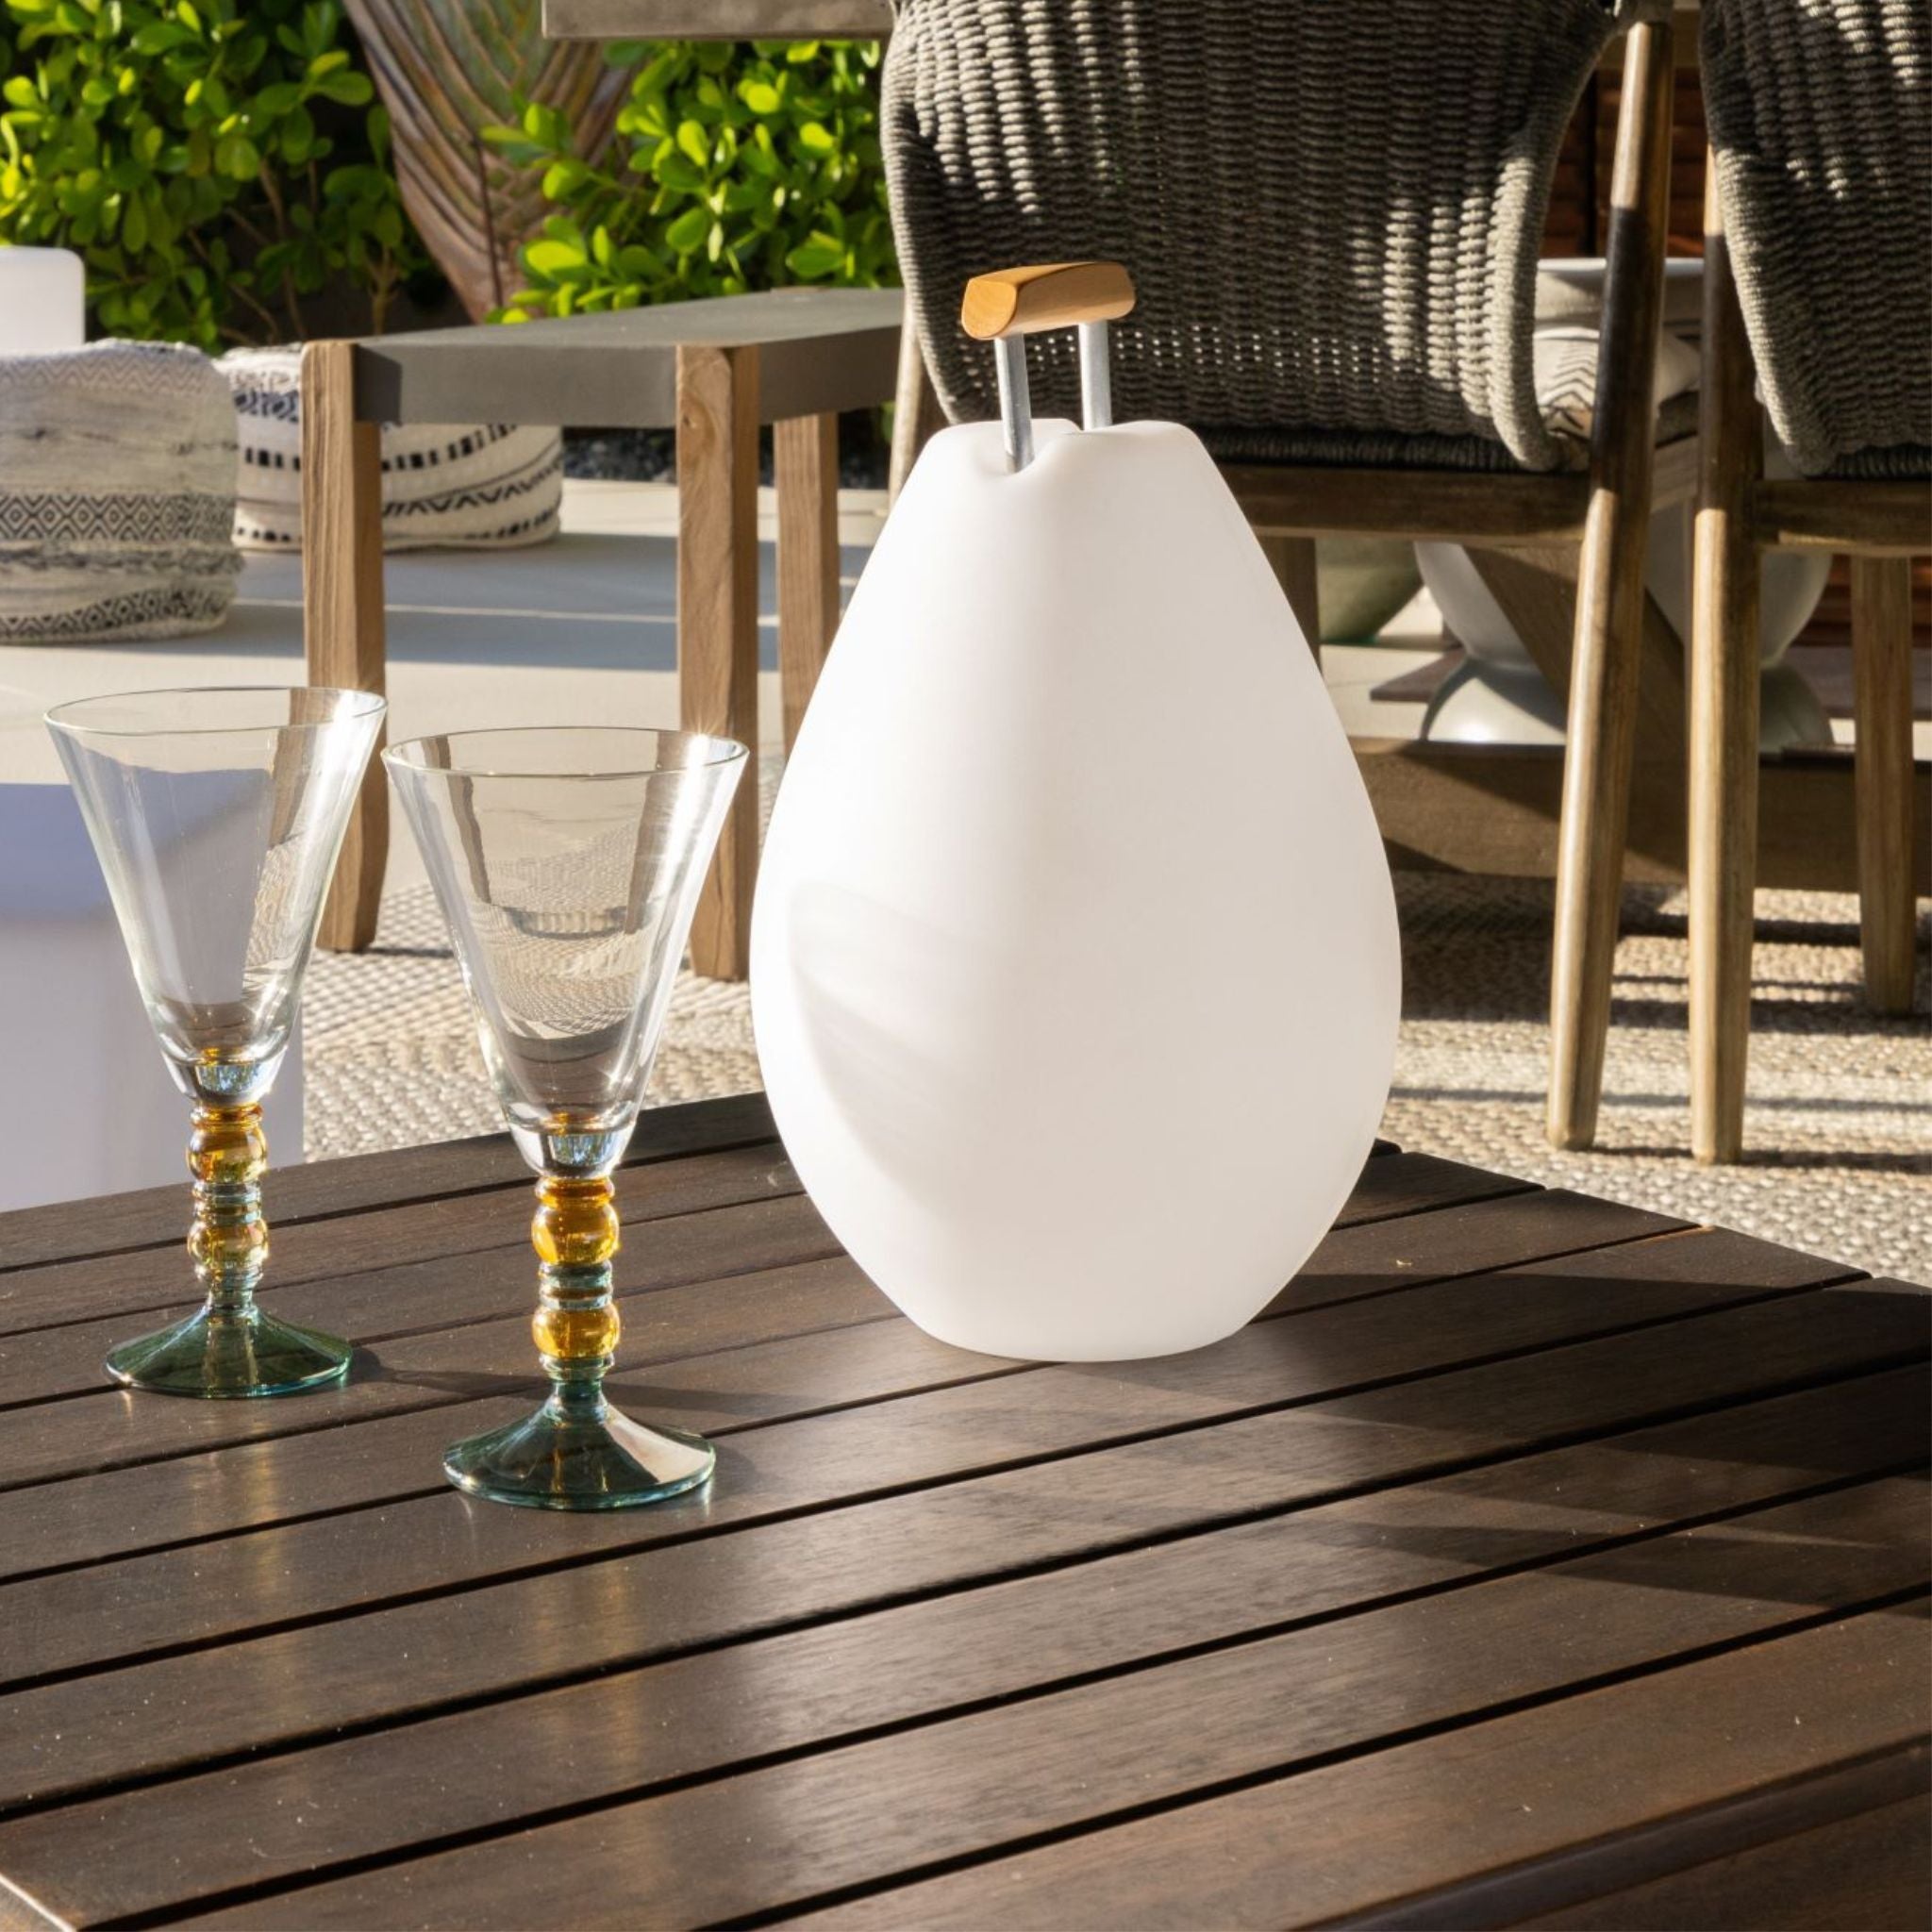 VESSEL2S, wireless light with wooden handle "App-control